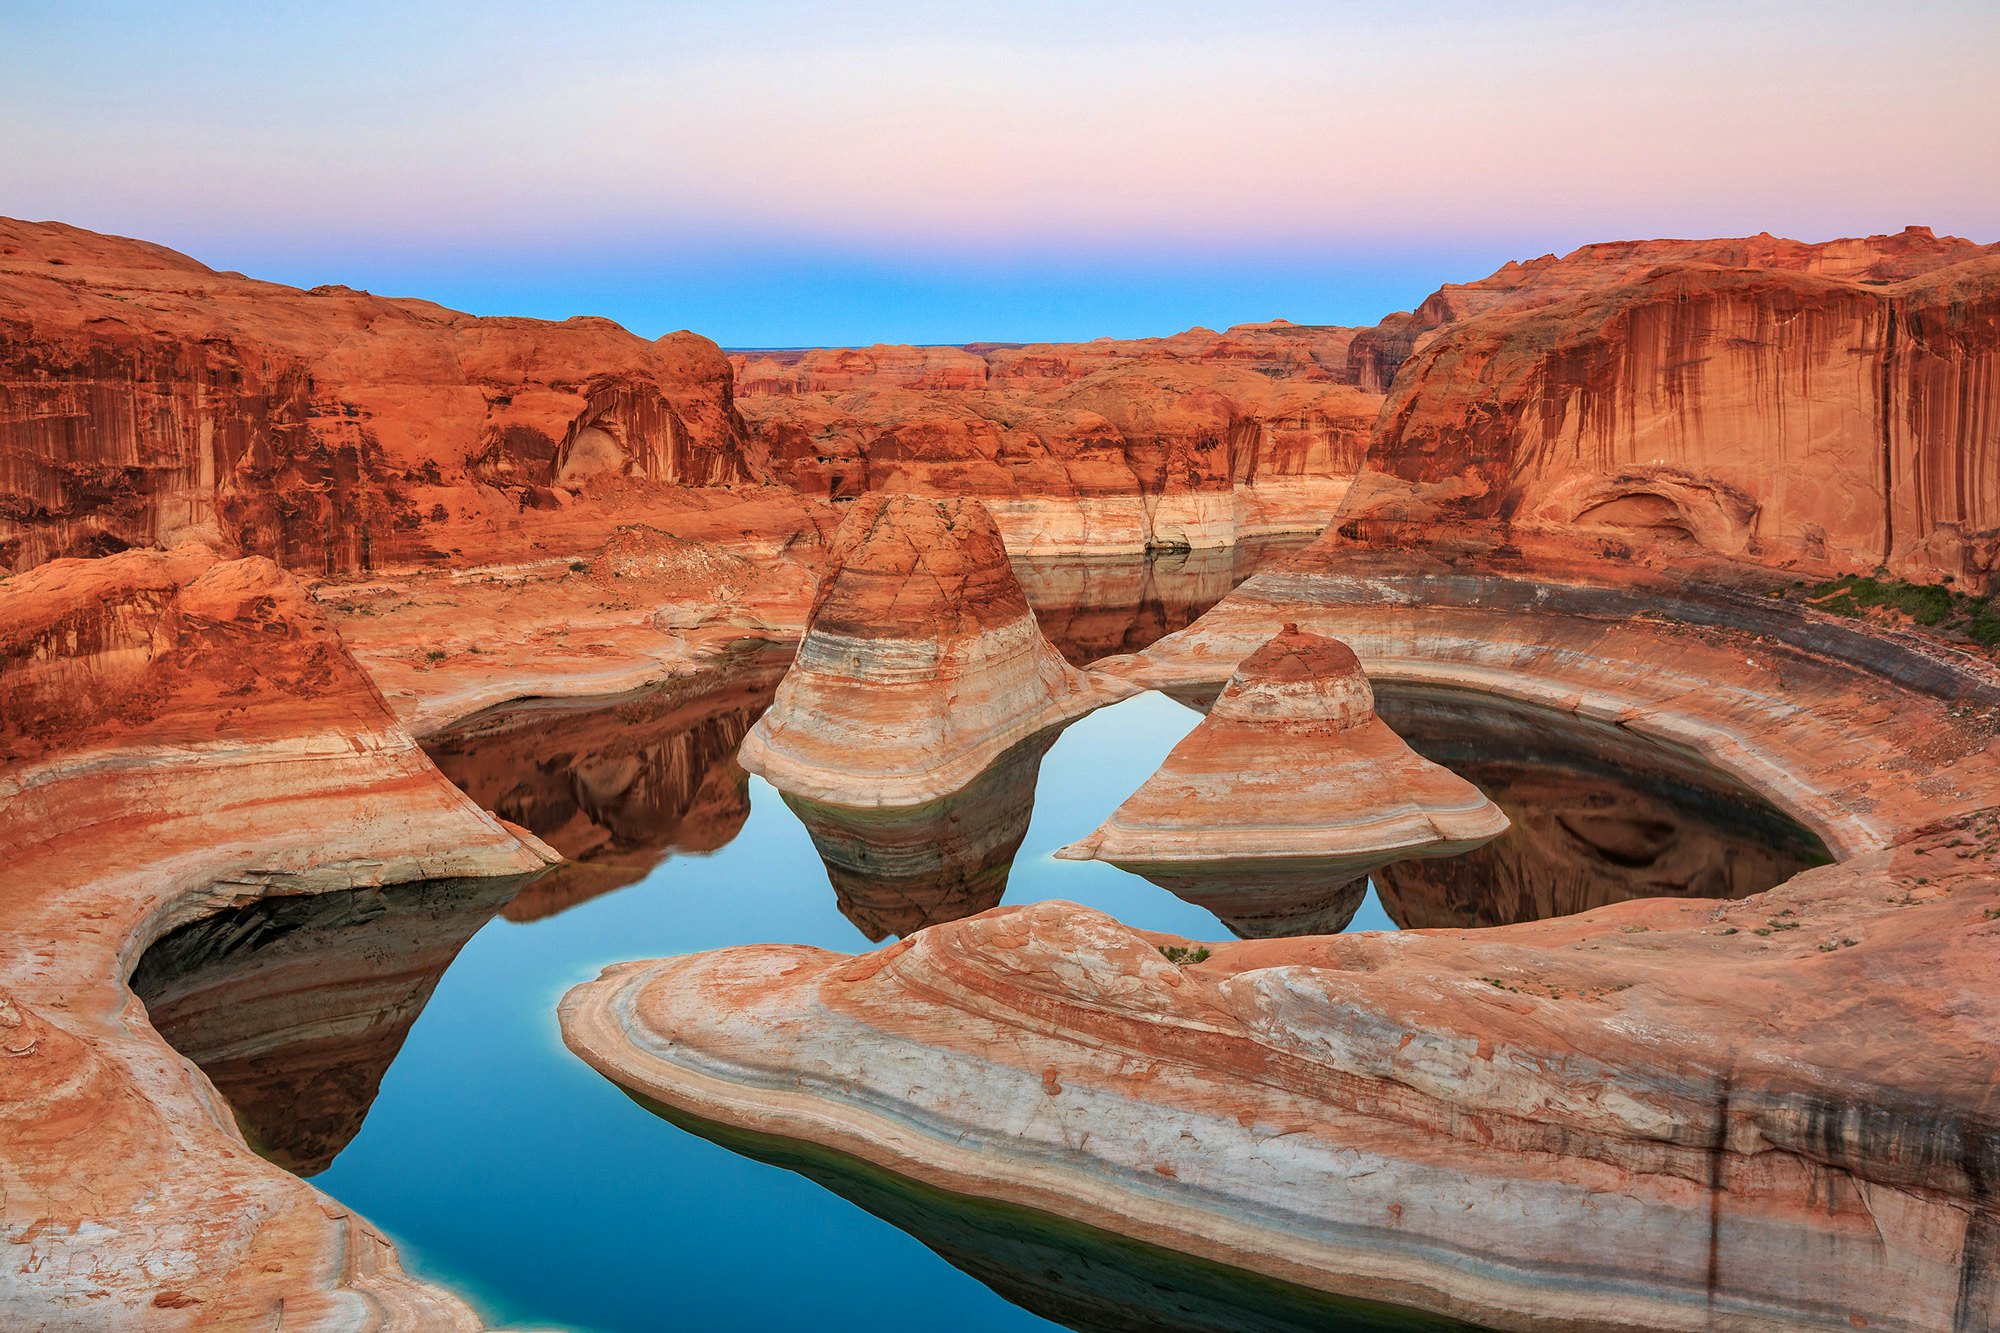 Reflection Canyon, one of the myriad geological wonders along the length of Lake Powell © Johnny Adolphson / Shutterstock